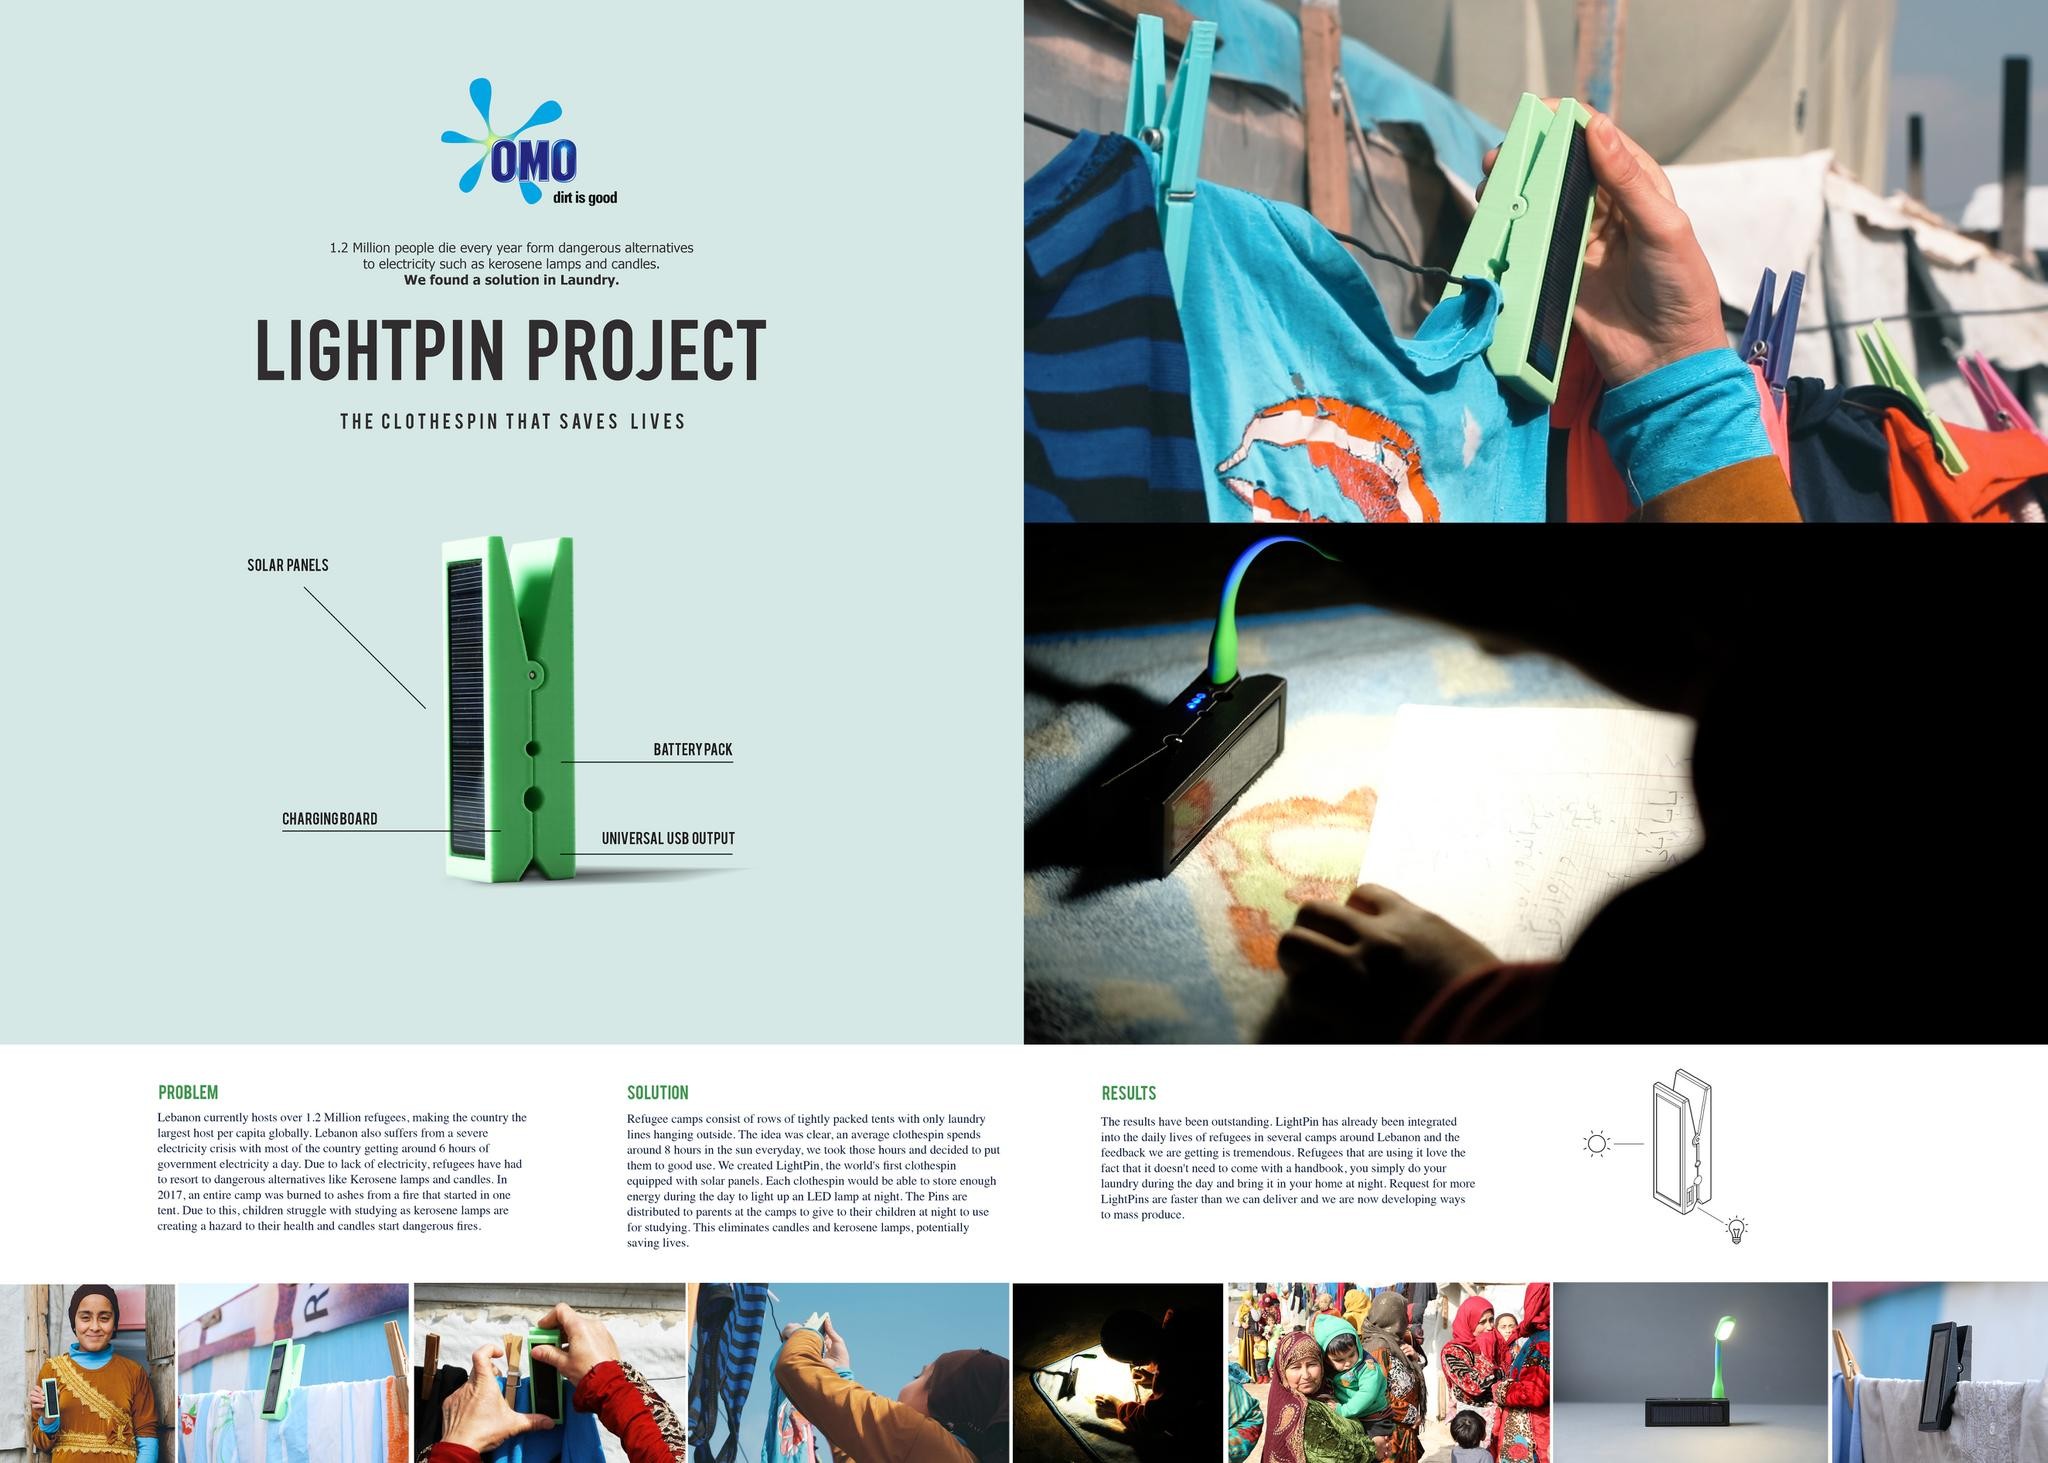 The Light Pin Project